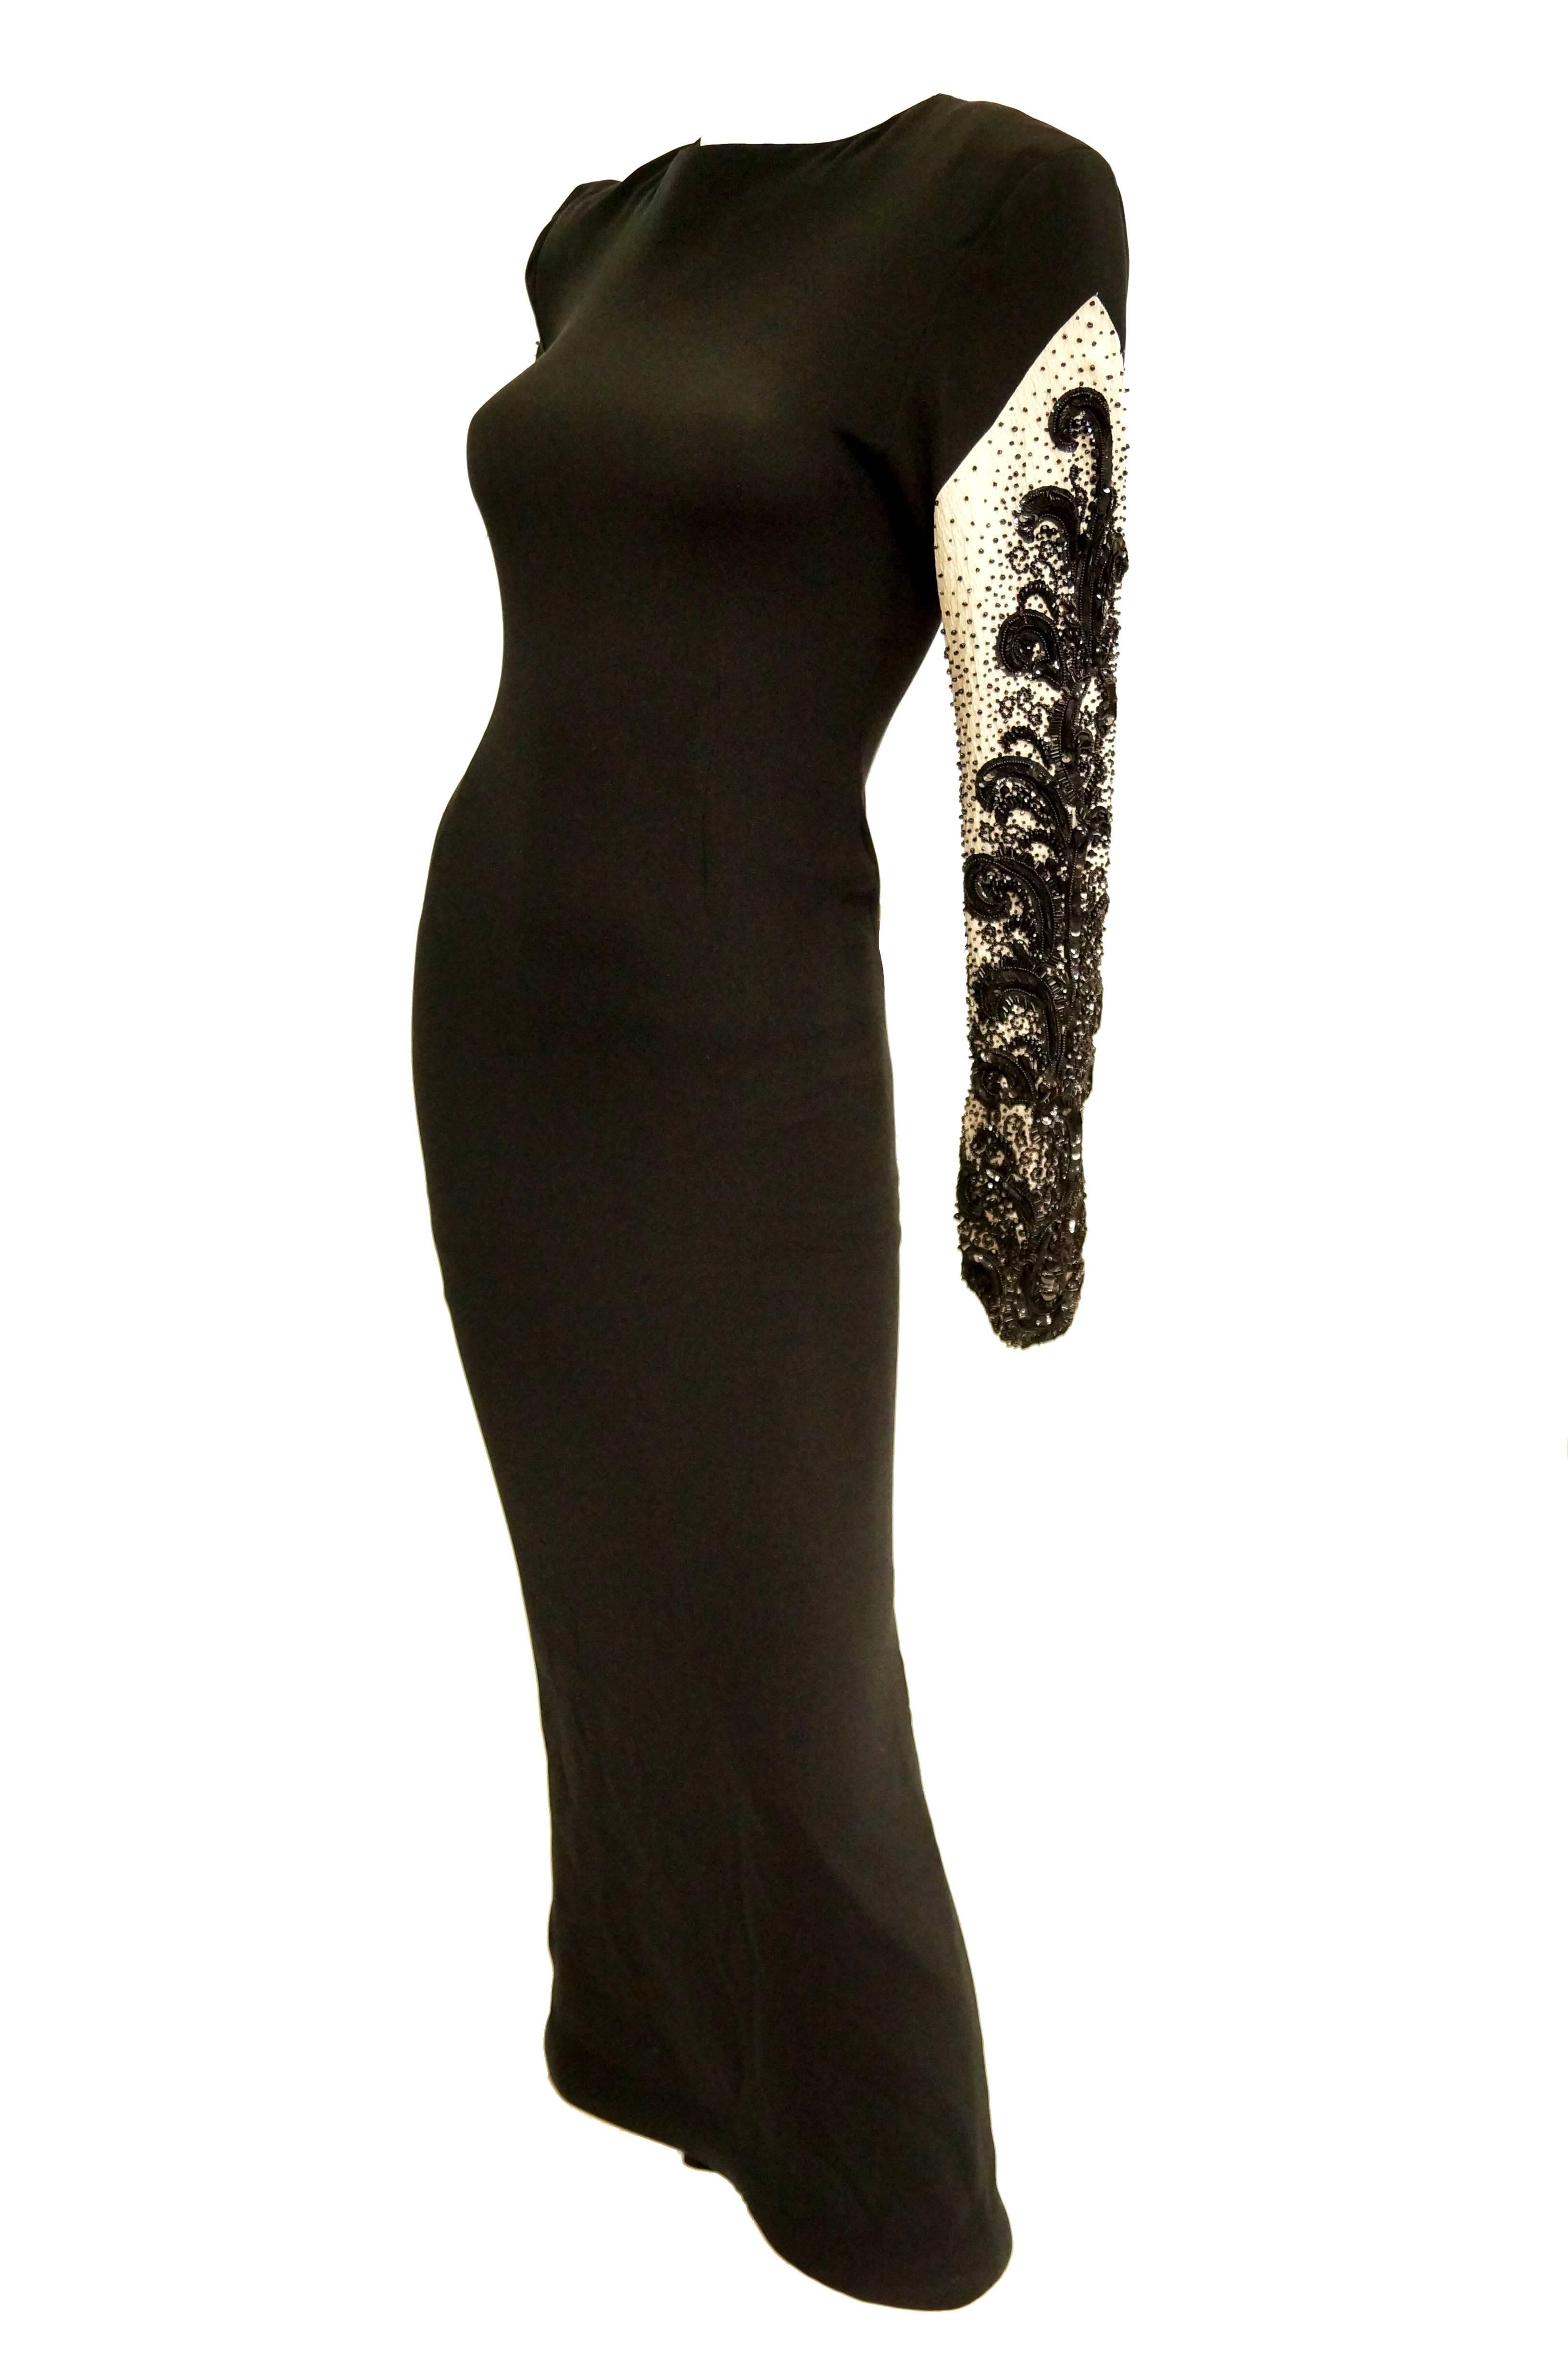 Gorgeous, heavily beaded Bill Blass evening dress. Form fitting floor length maxi dress with wide jewel neckline and long sleeves. The dress is primarily black, save for contrasting sleeves in a lightly crinkled white fabric. The sleeves are heavily